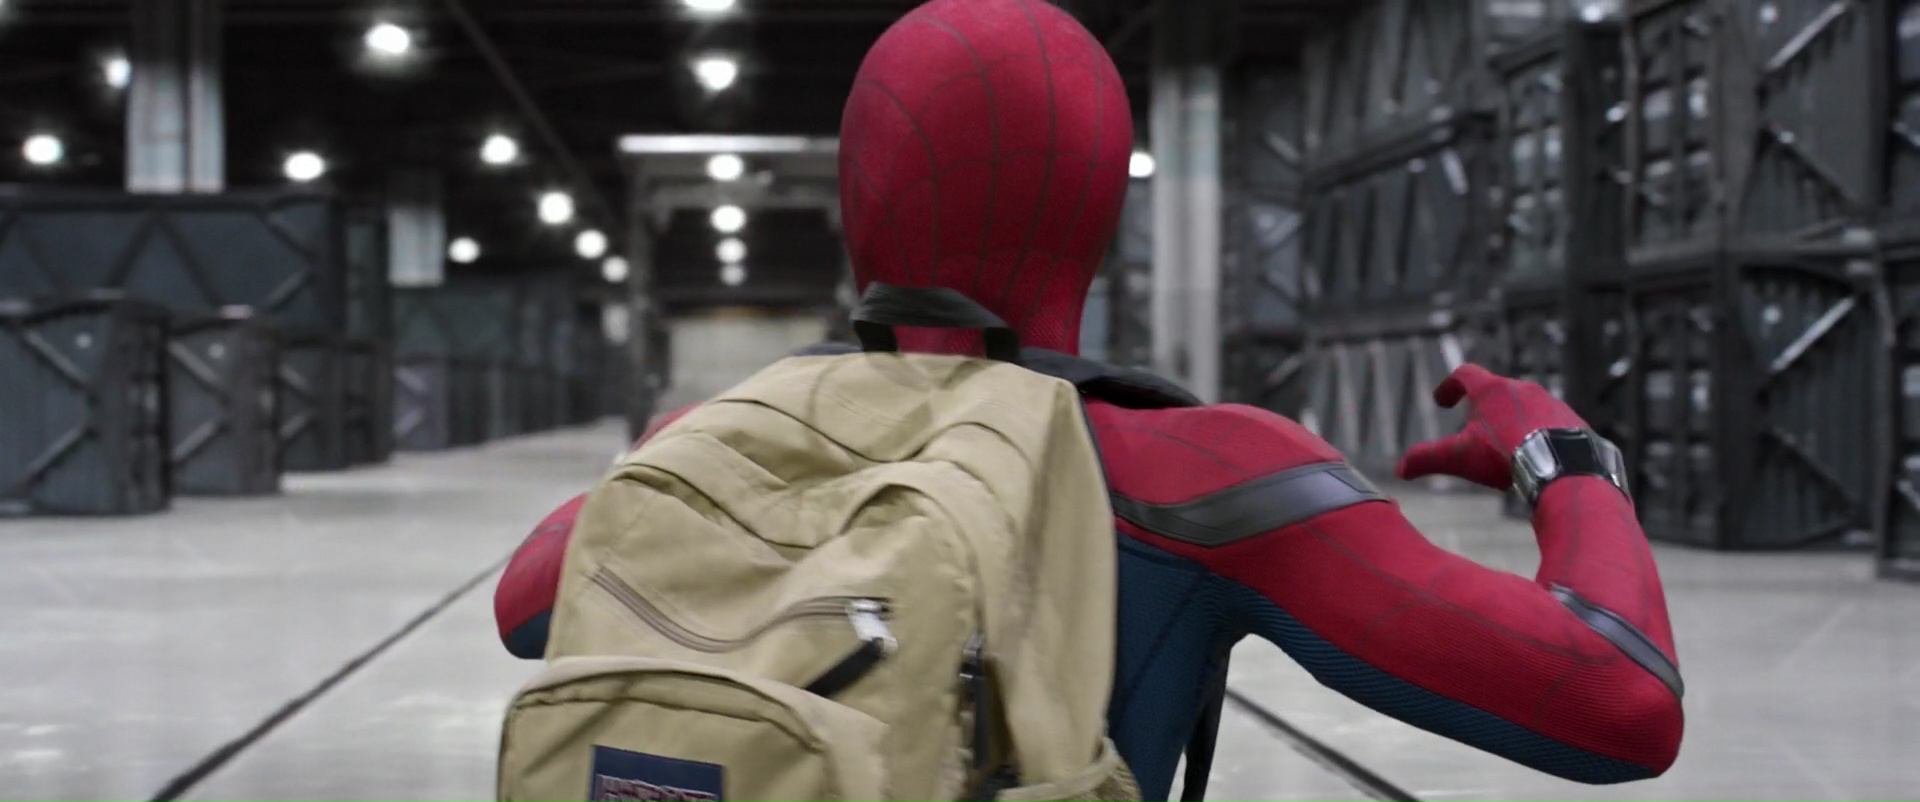 JanSport Backpack Worn by Tom Holland in Spider-Man: Homecoming (2017) Movie